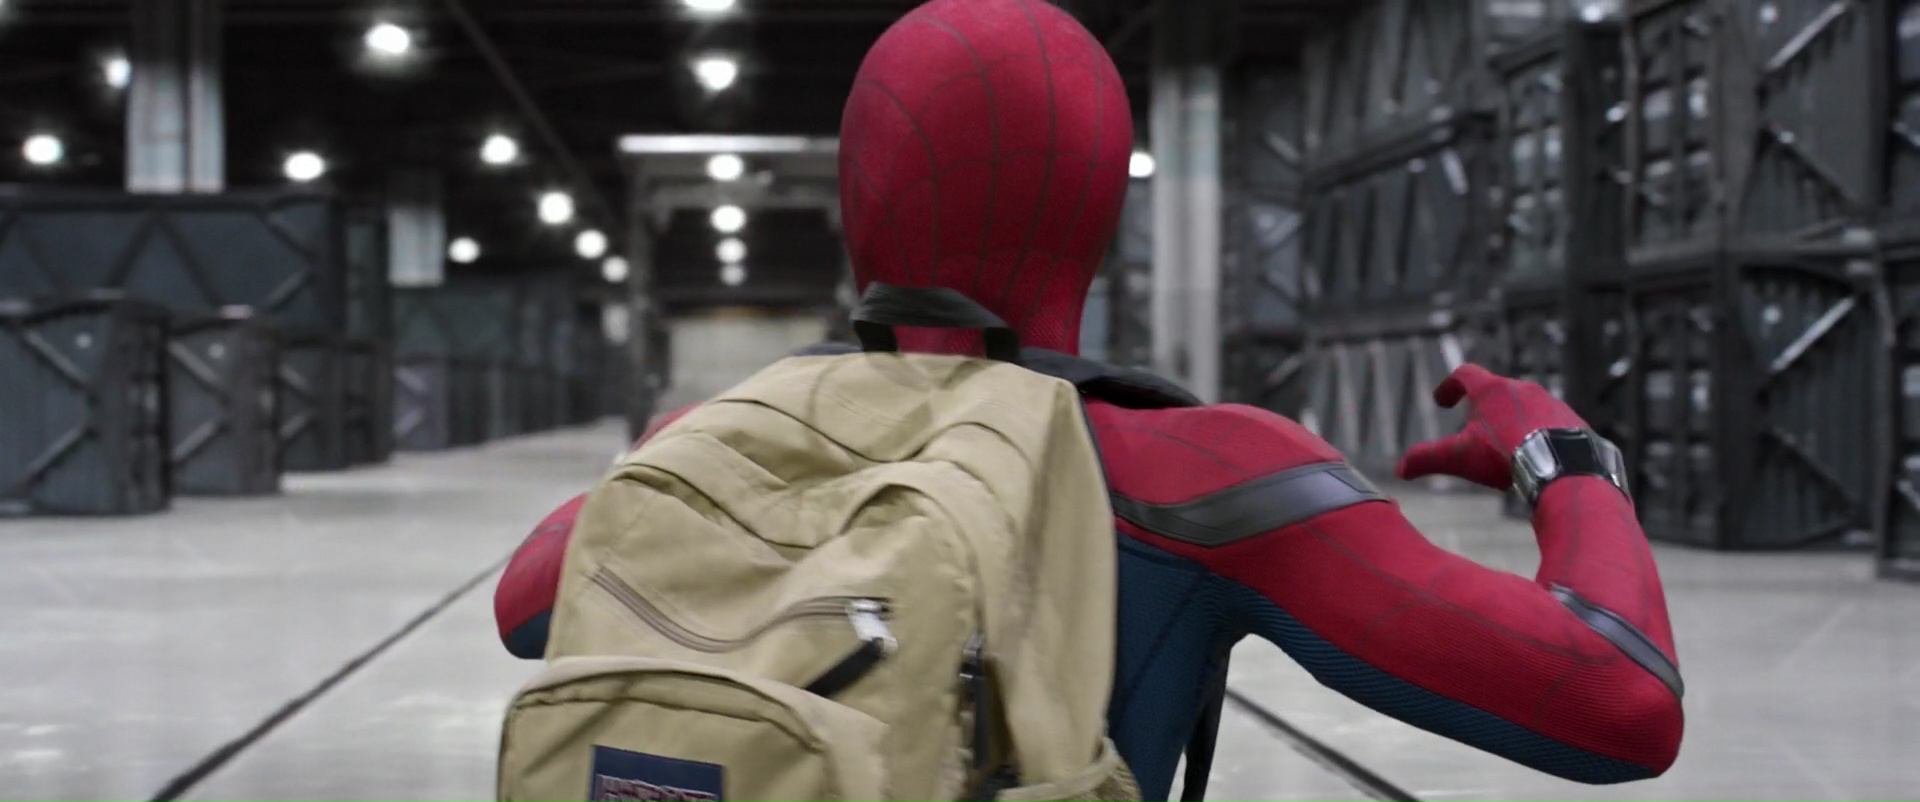 JanSport Backpack Worn by Tom Holland in Spider-Man: Homecoming (2017) Movie